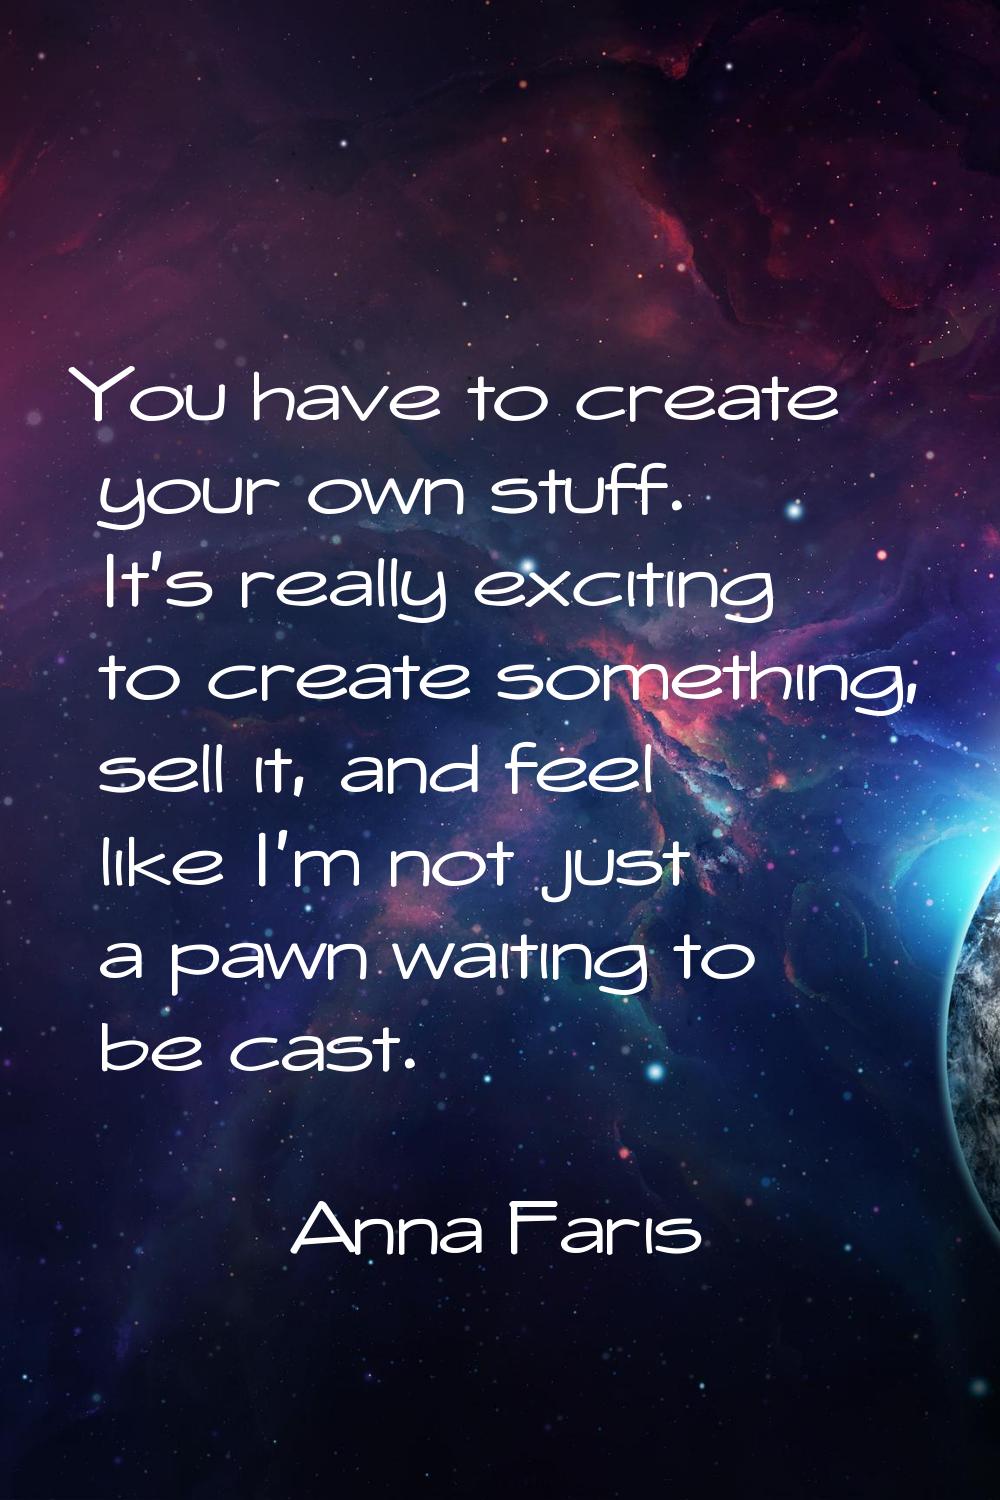 You have to create your own stuff. It's really exciting to create something, sell it, and feel like